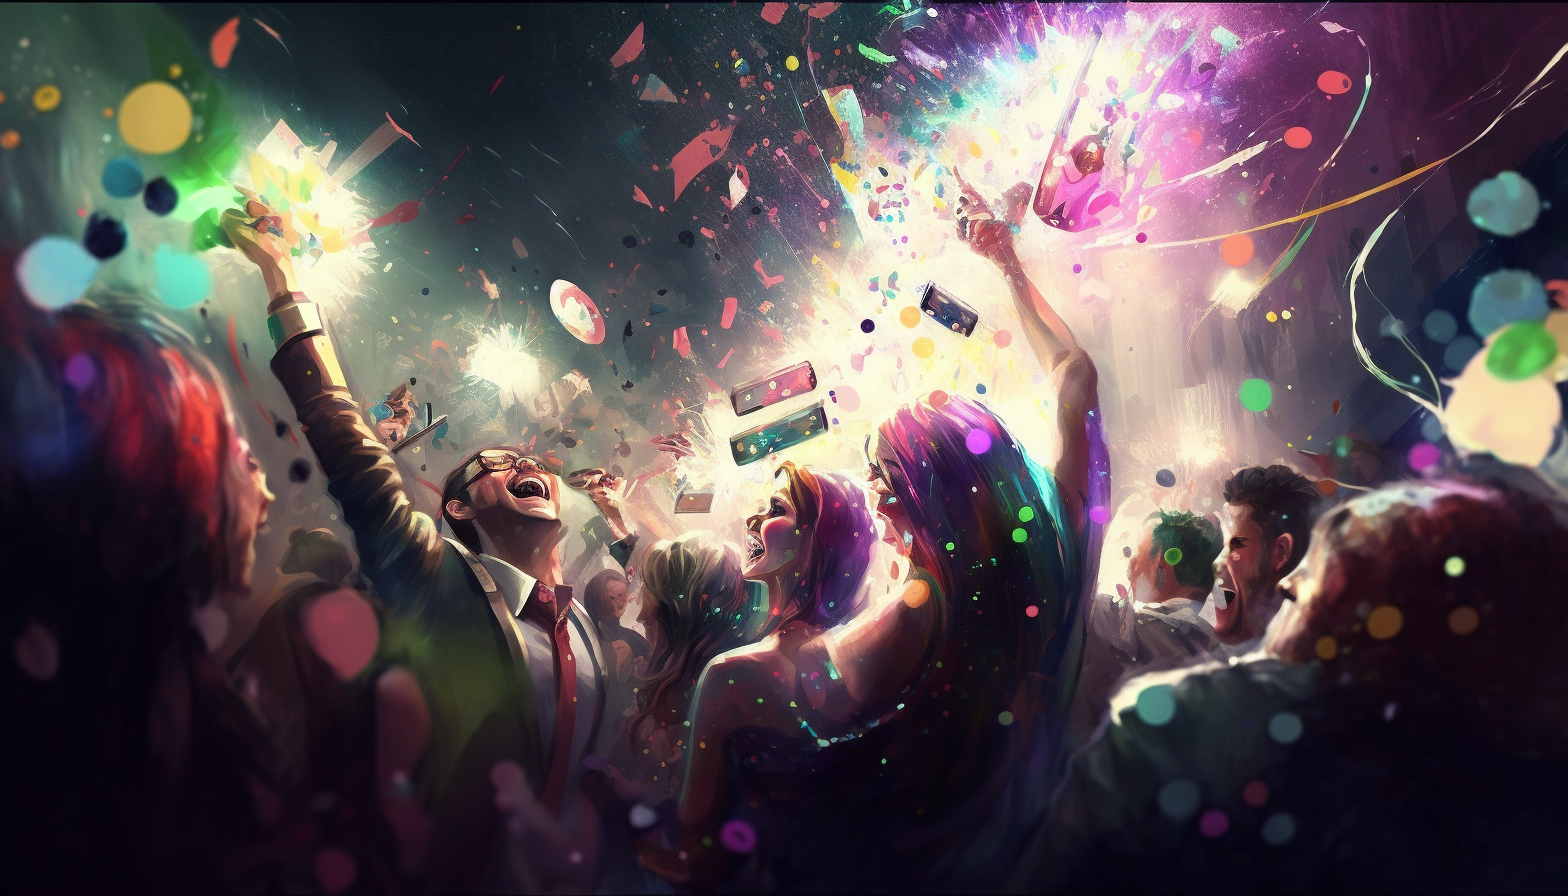 A group of people celebrating at a party with confetti.